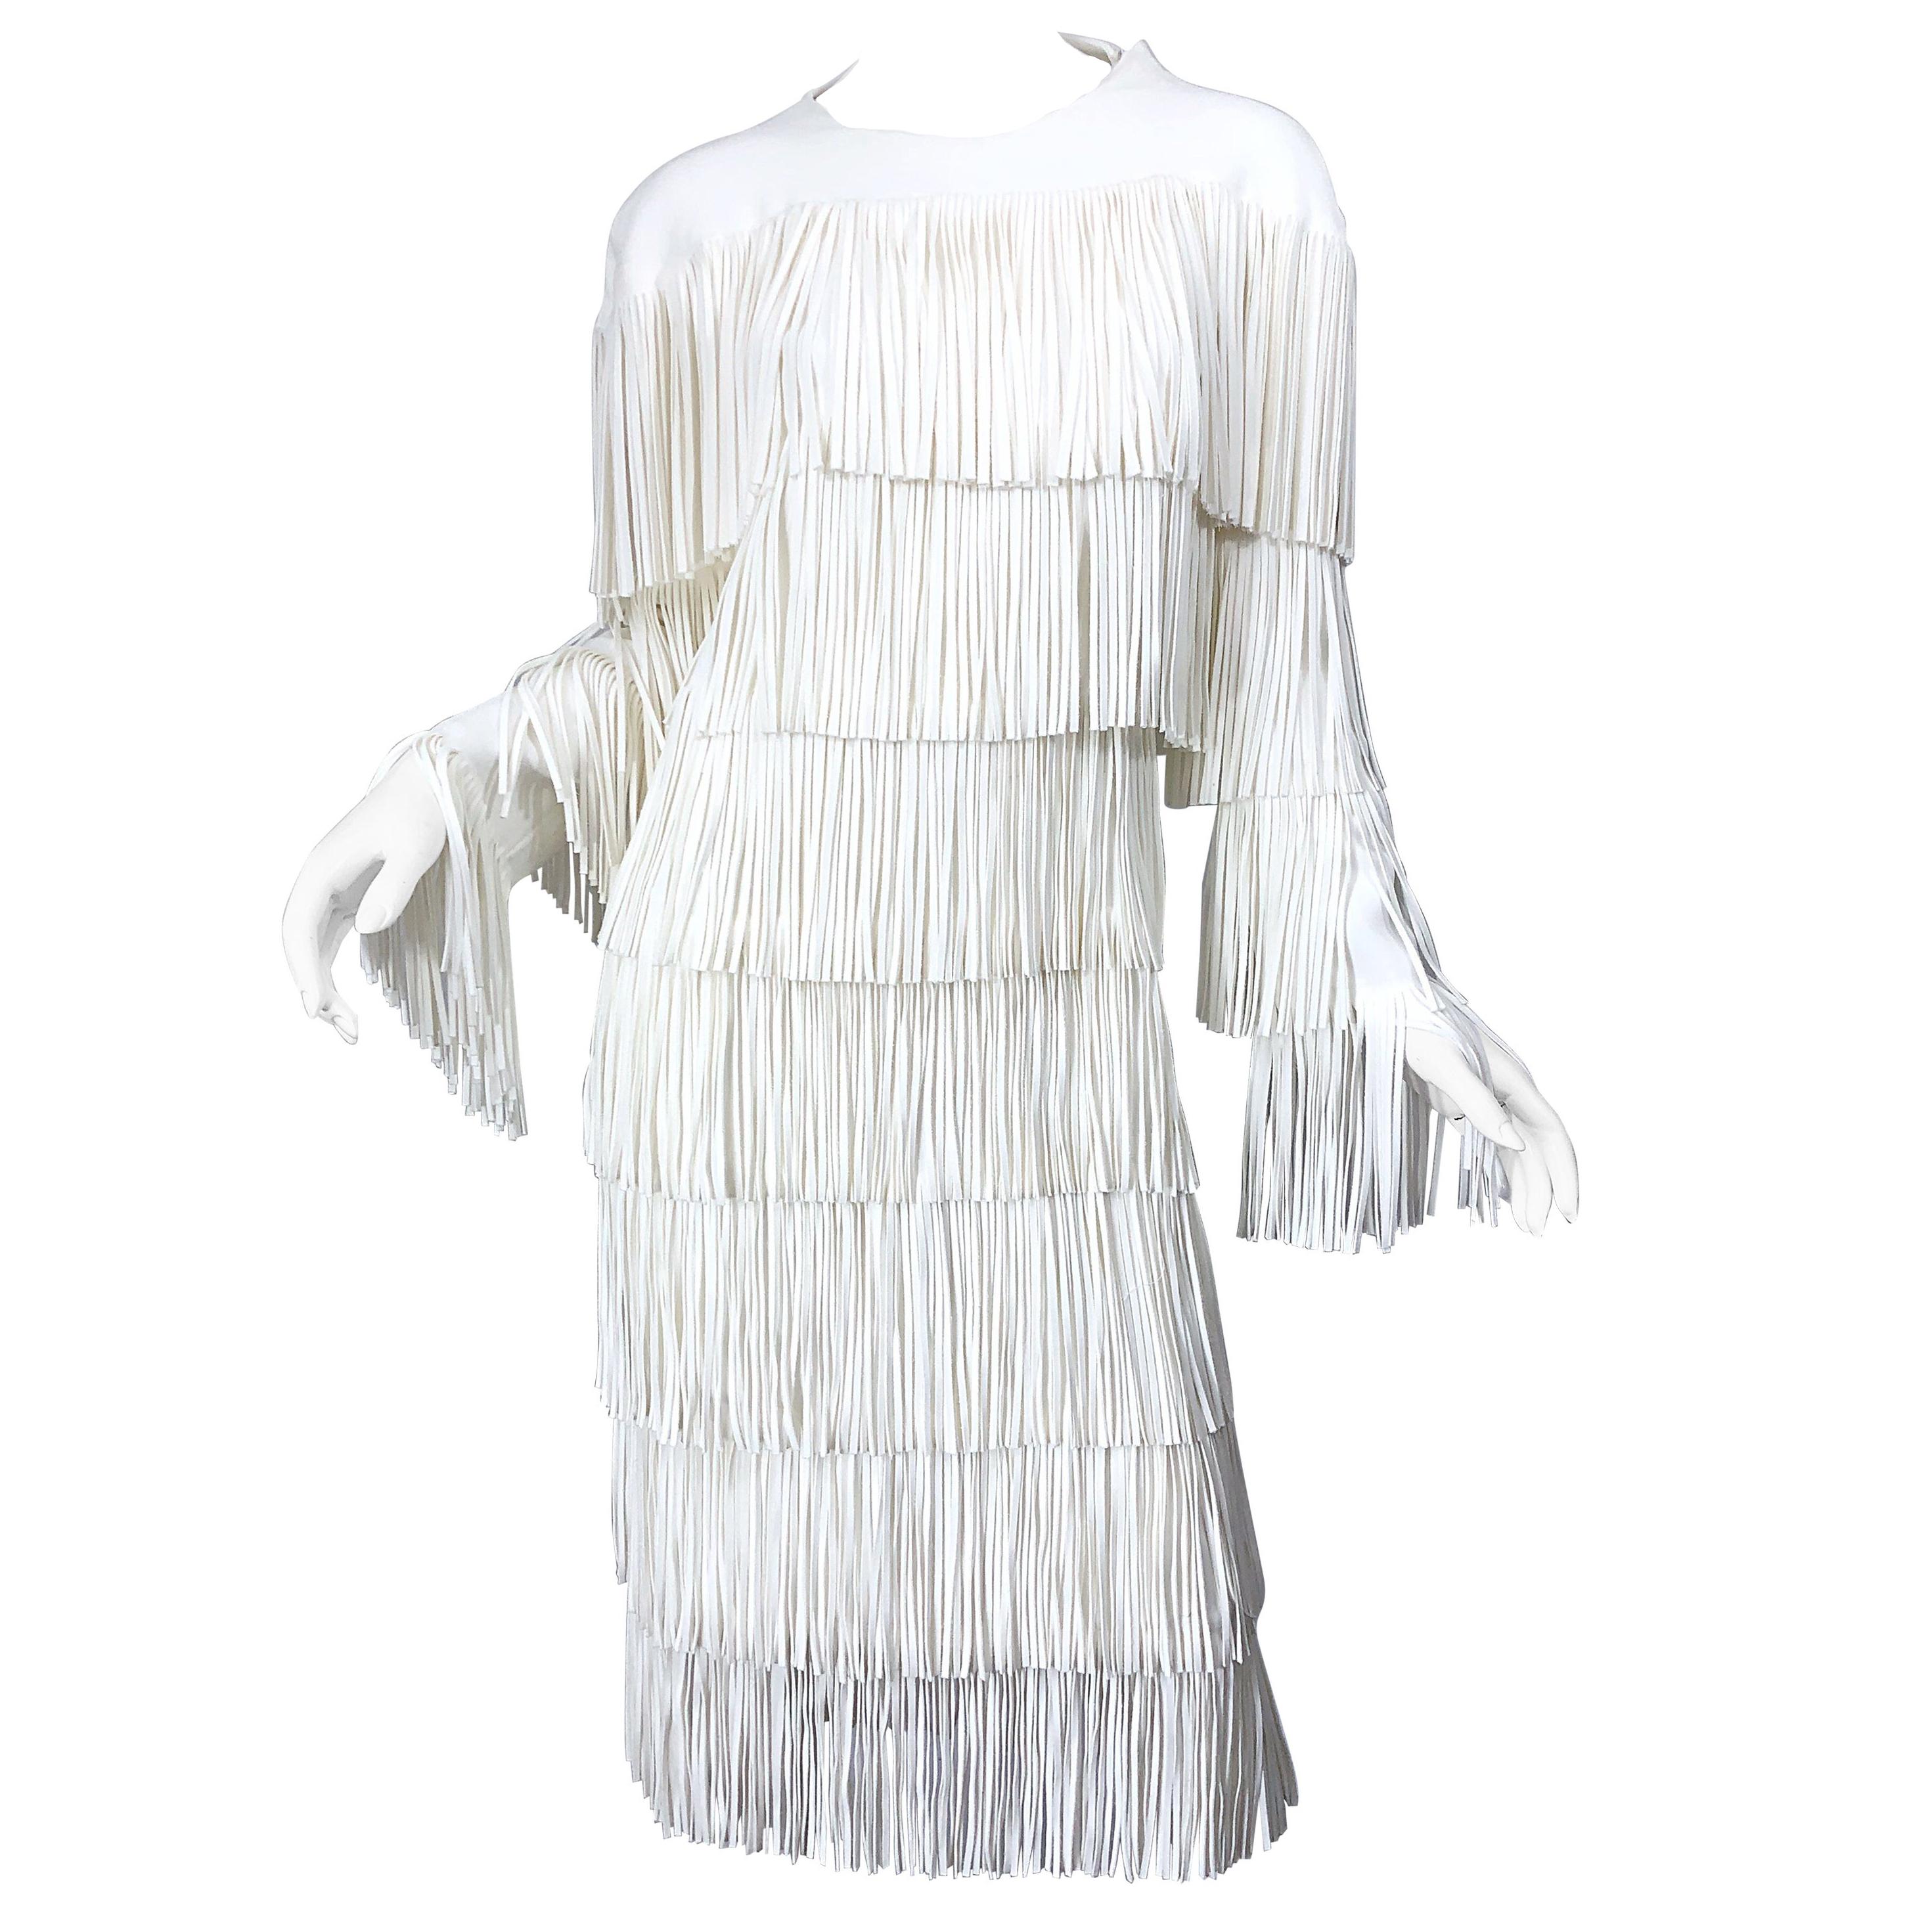 NWT Tom Ford $7, 000 Runway Fall 2015 Size 42 / 8 White Open Back Fringe Dress For Sale